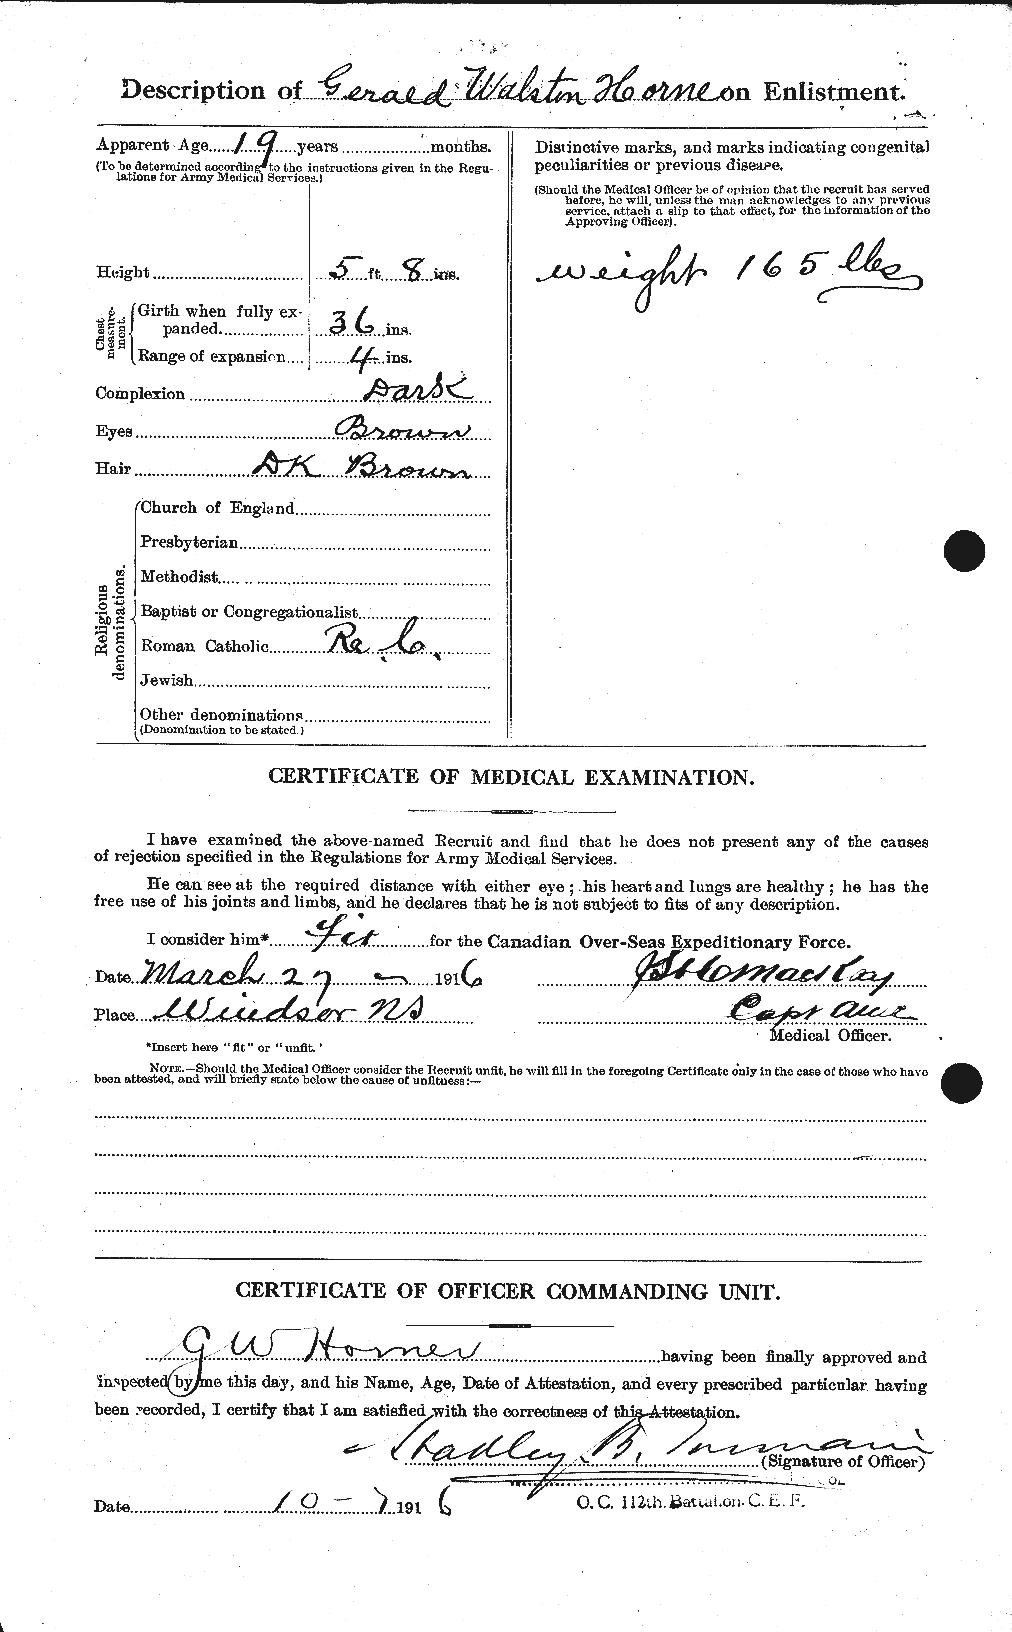 Personnel Records of the First World War - CEF 399617b